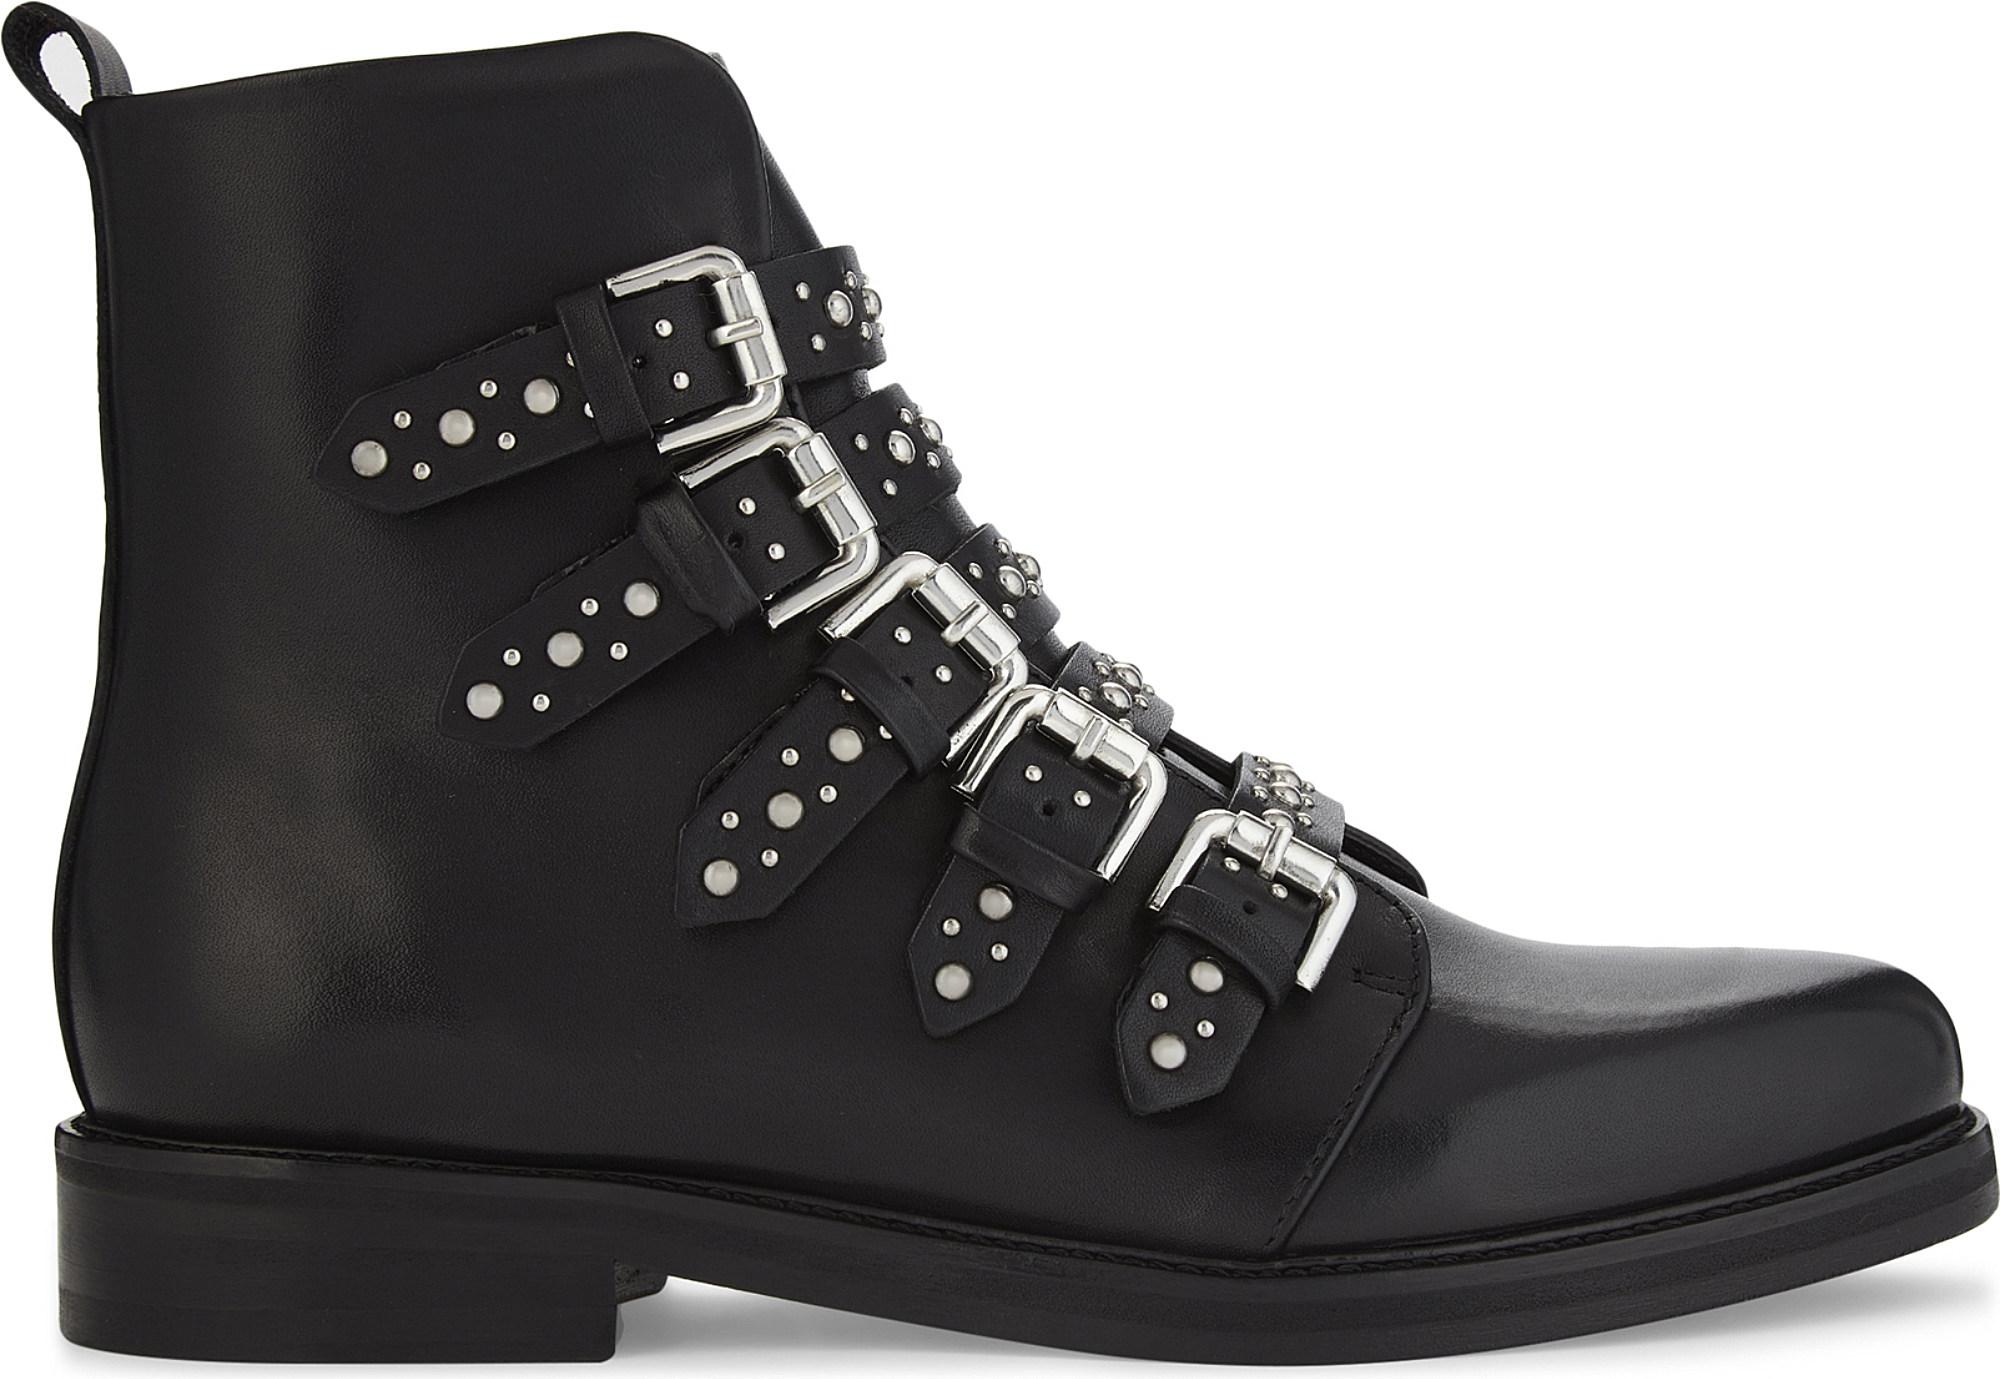 Lyst - Maje Fortune Leather Buckled Biker Boots in Black